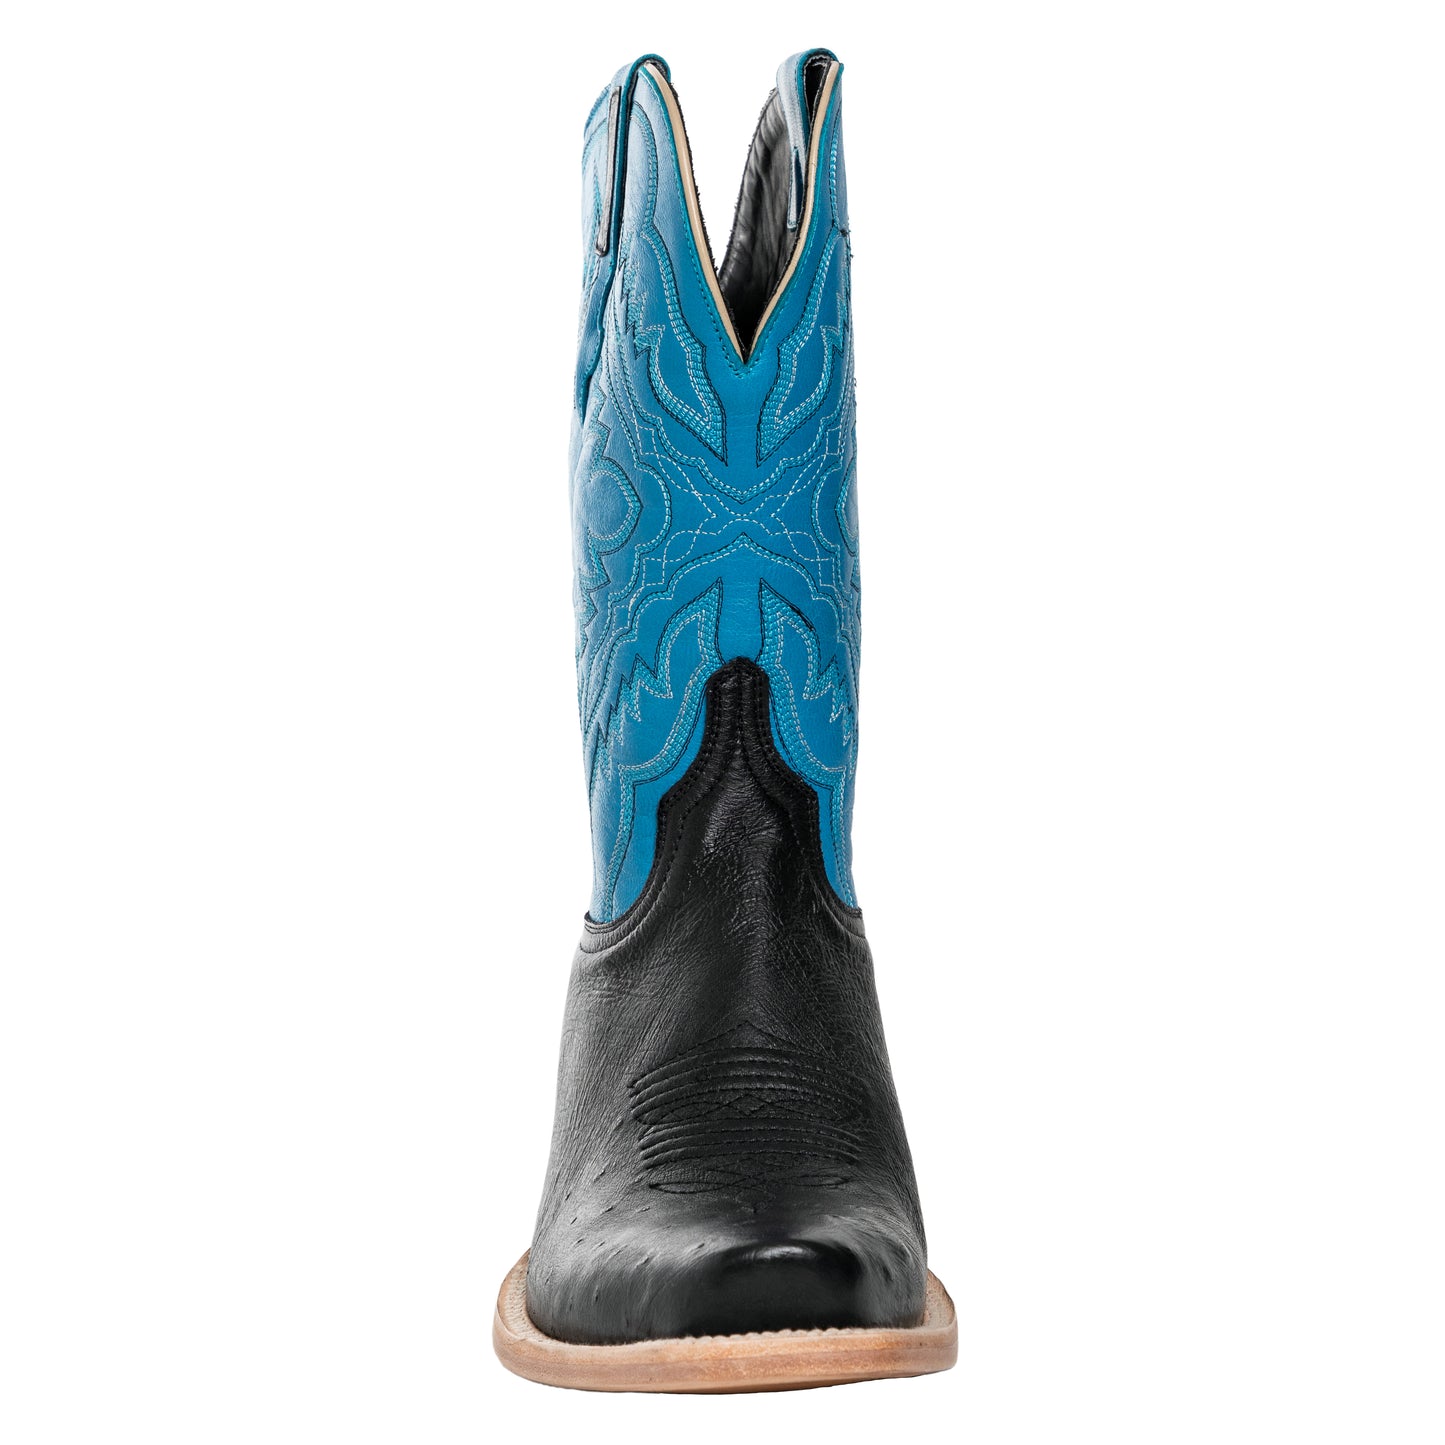 Resistol Boots - Smooth Quill Ostrich - Cutter Toe - Black